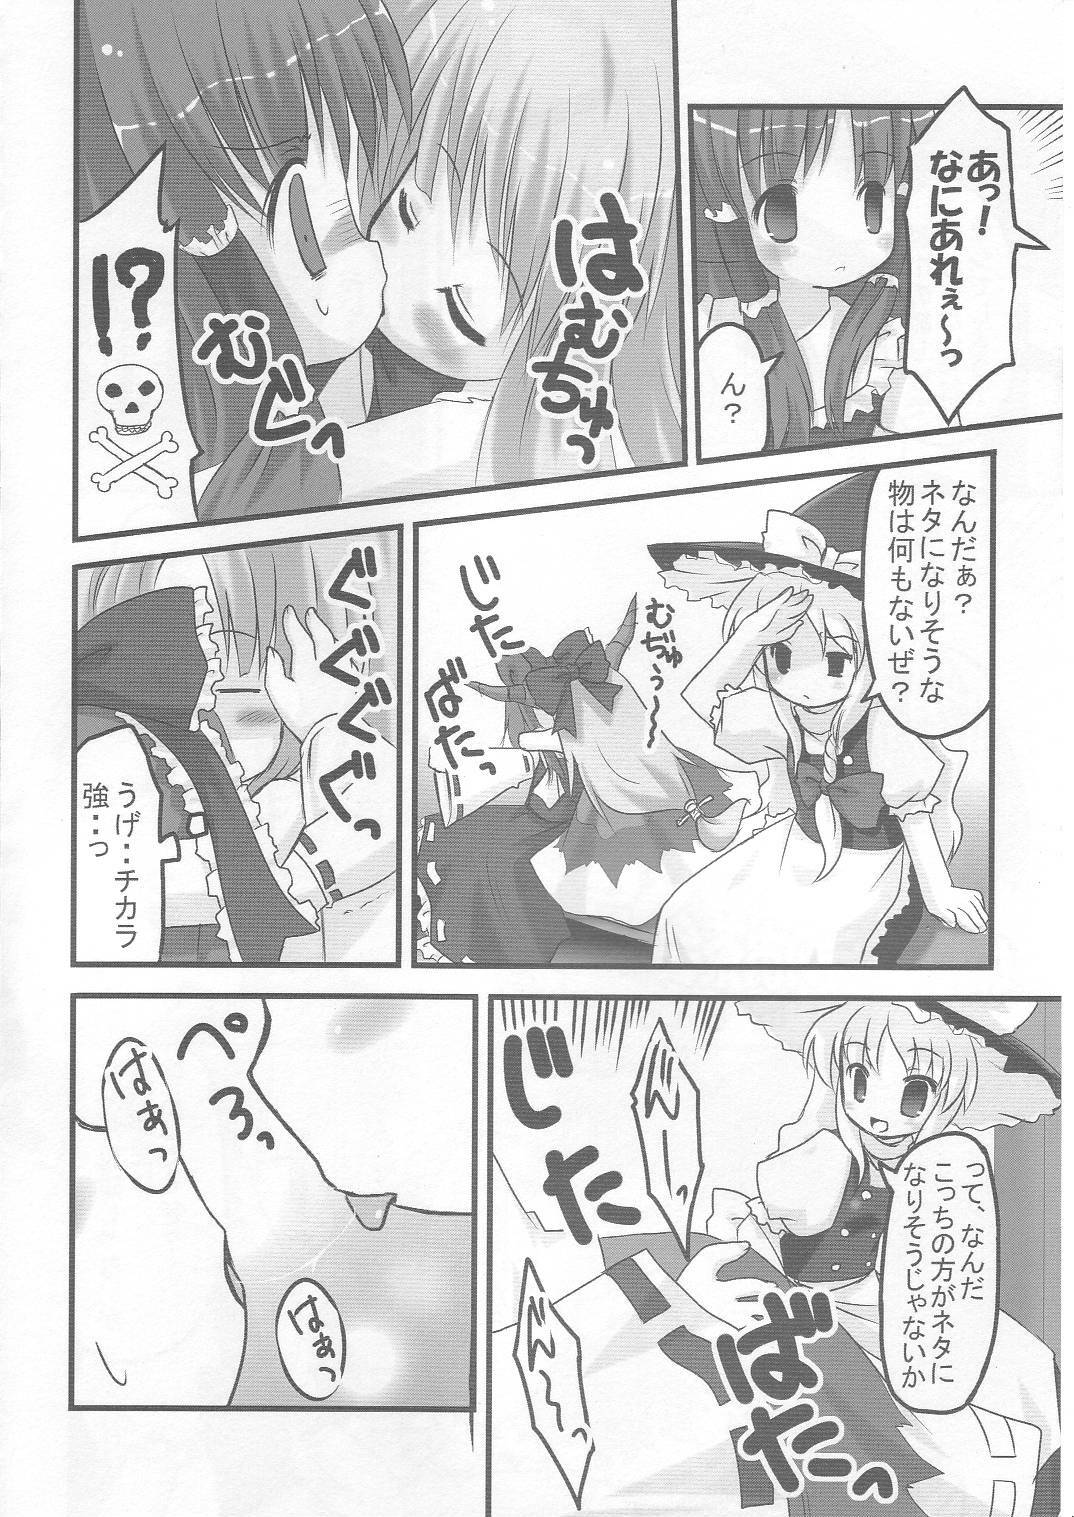 (SC30) [HappyBirthday (Maruchan., Monchy)] REDEMPTION (Touhou Project) page 21 full